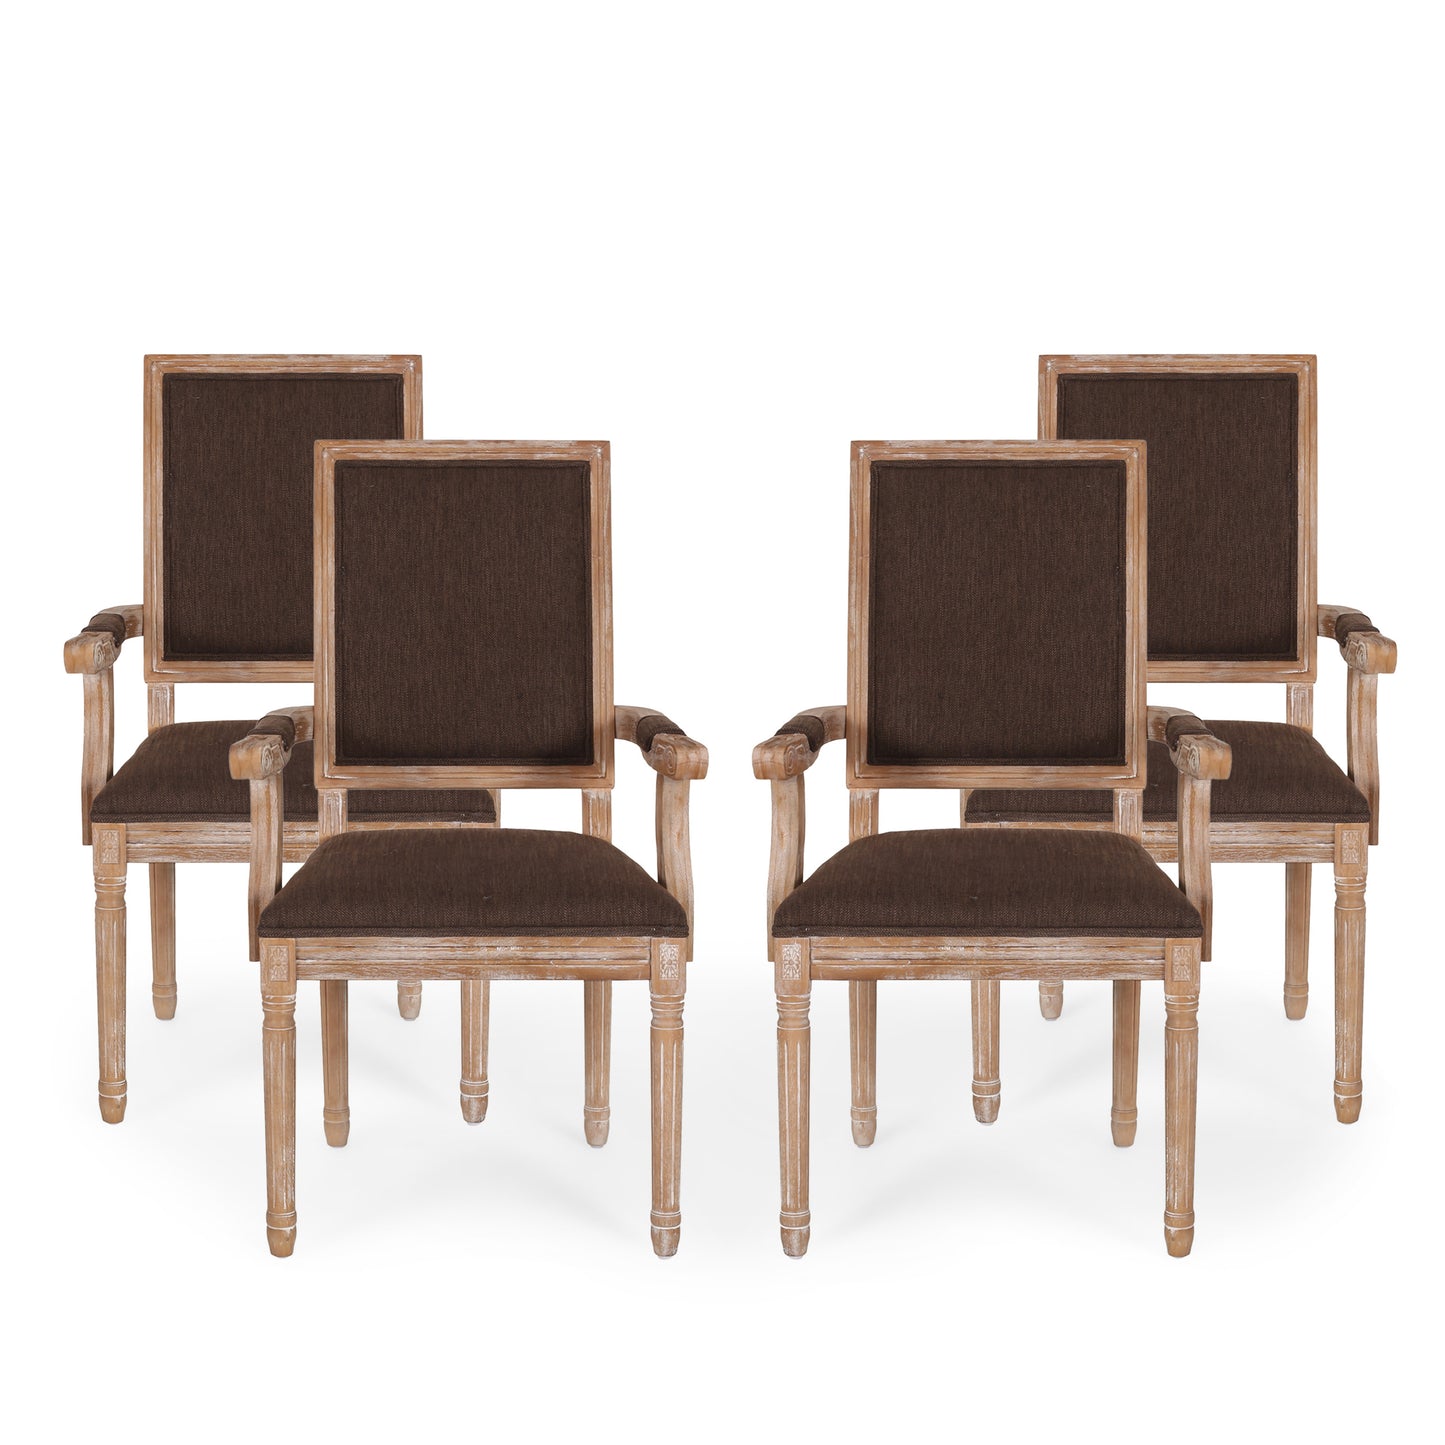 Ashlyn French Country Fabric Upholstered Wood Dining Chairs, Set of 4